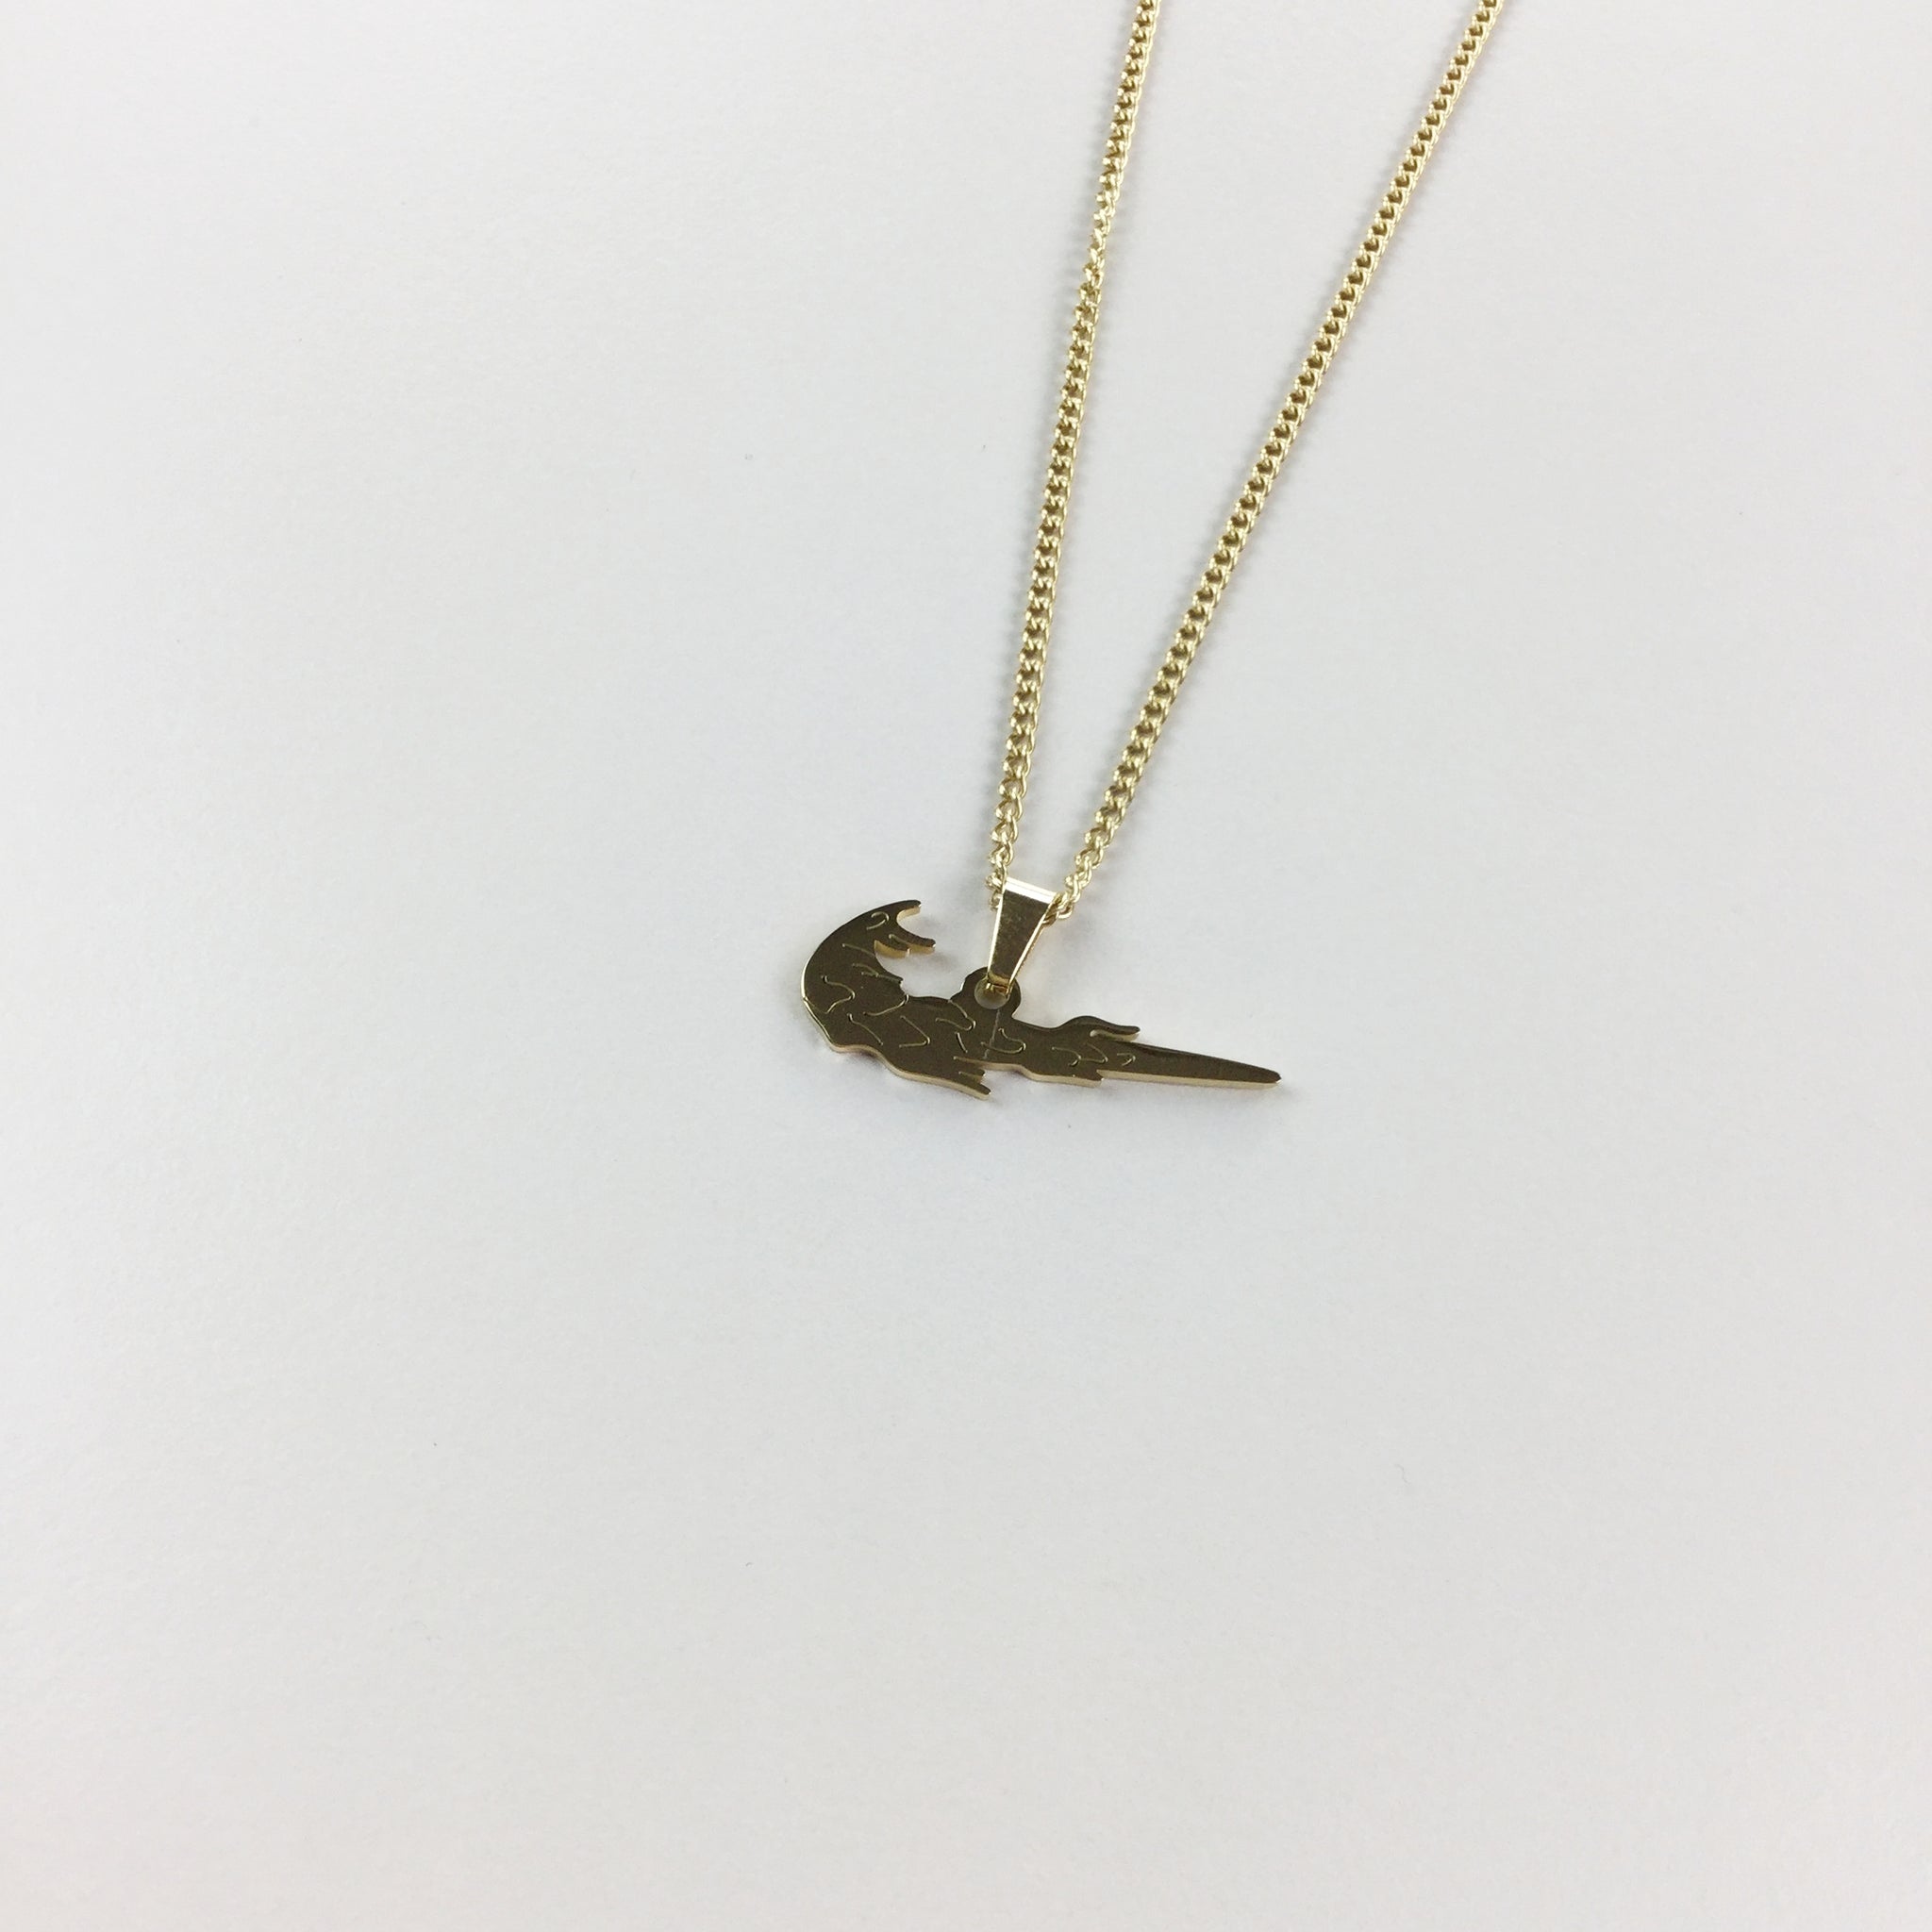 Gold Plated Diamond Nike Swoosh Necklace Stainless Steel 